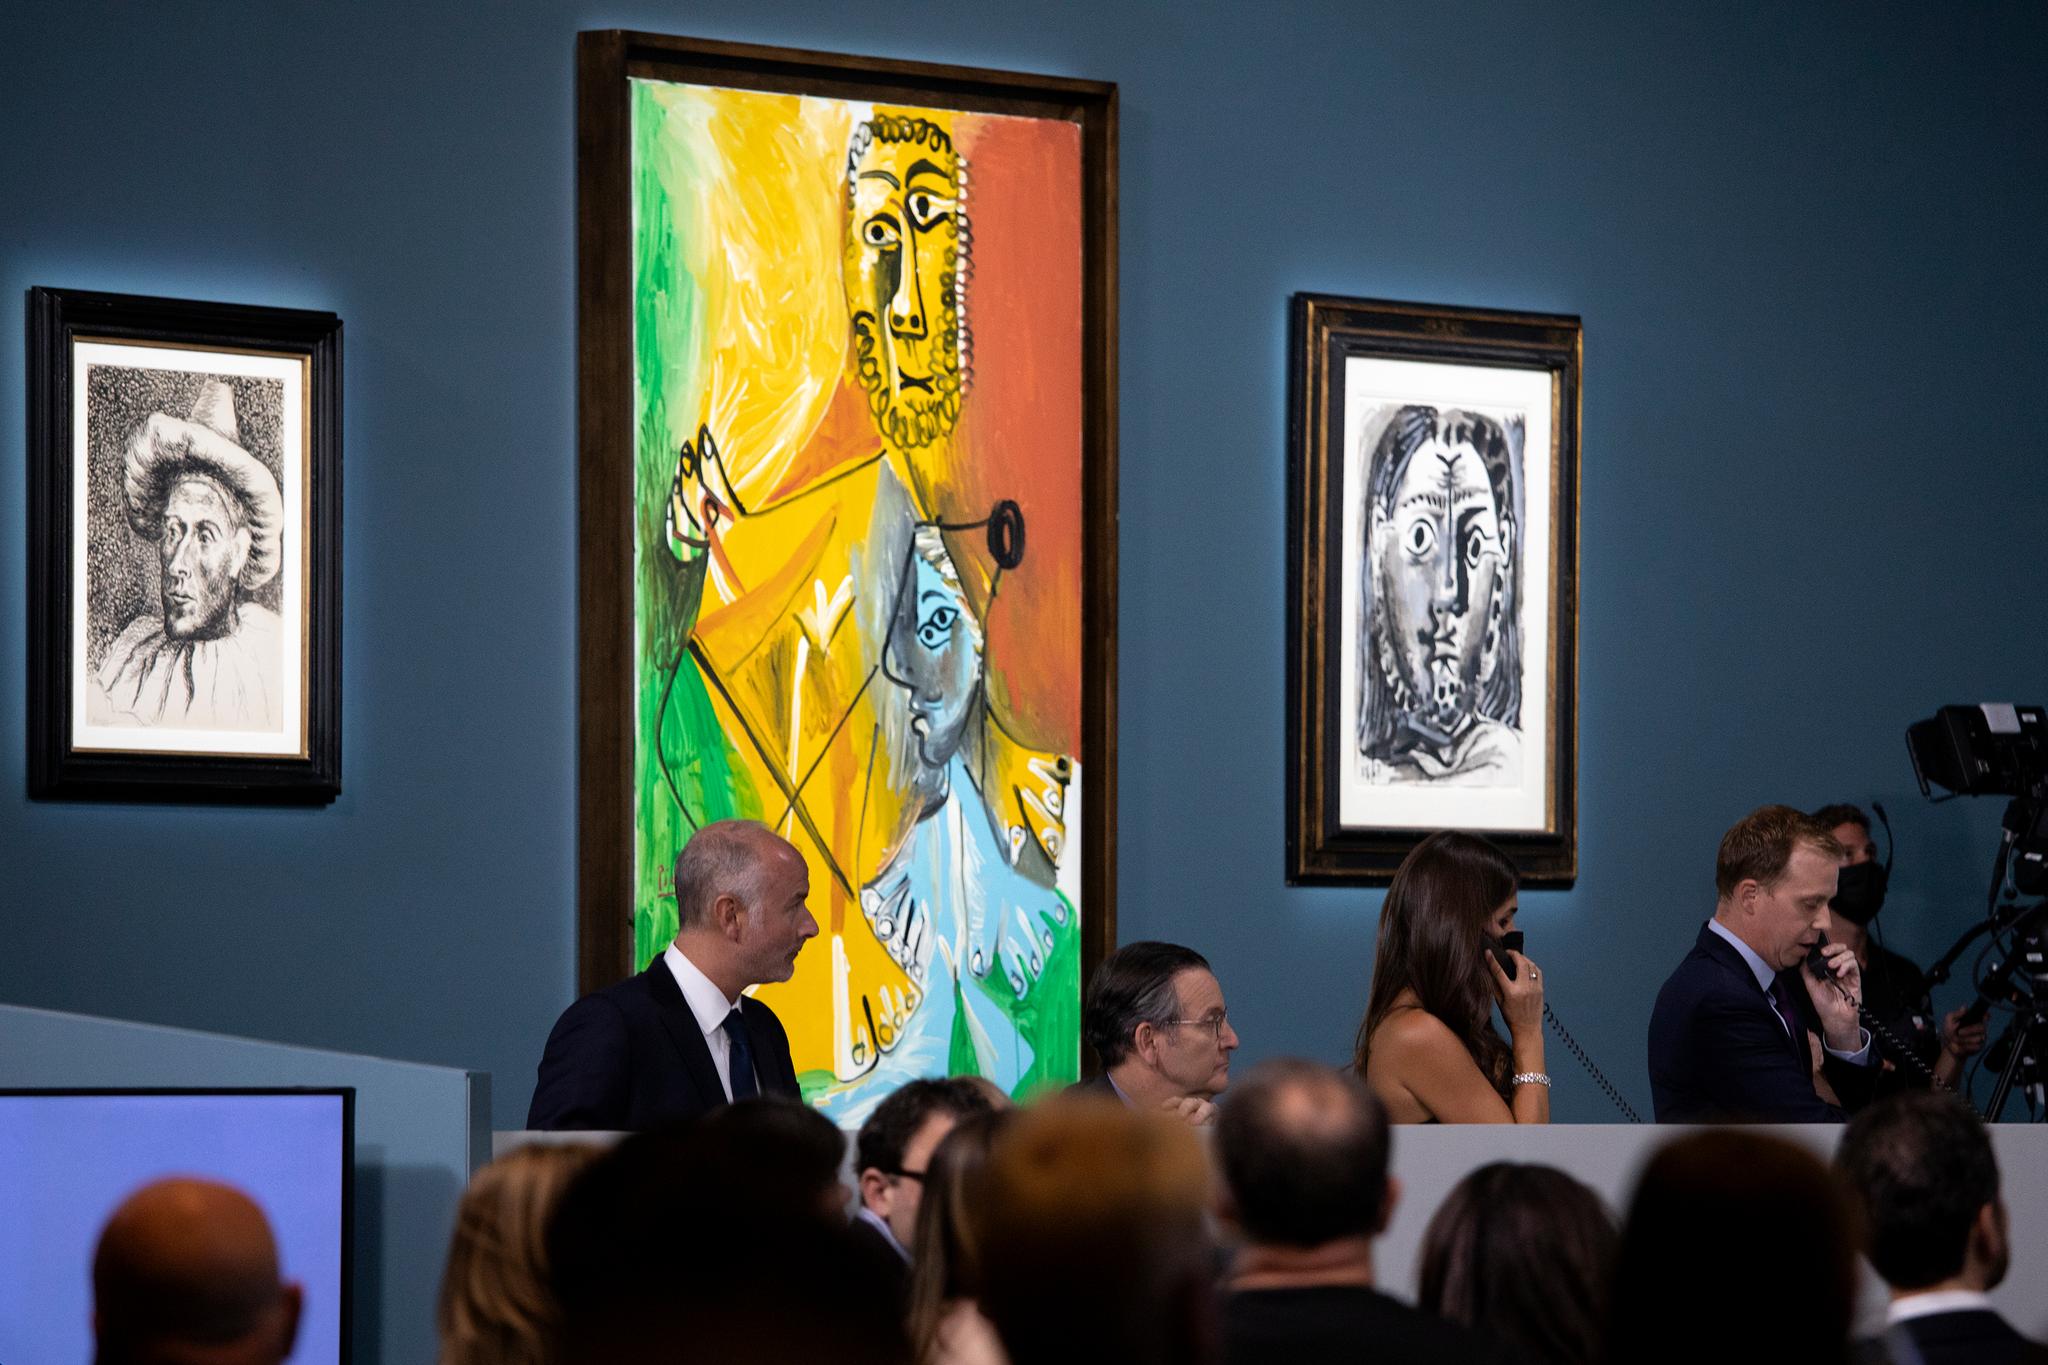 Artworks by Pablo Picasso are displayed for auction at the Bellagio hotel and casino